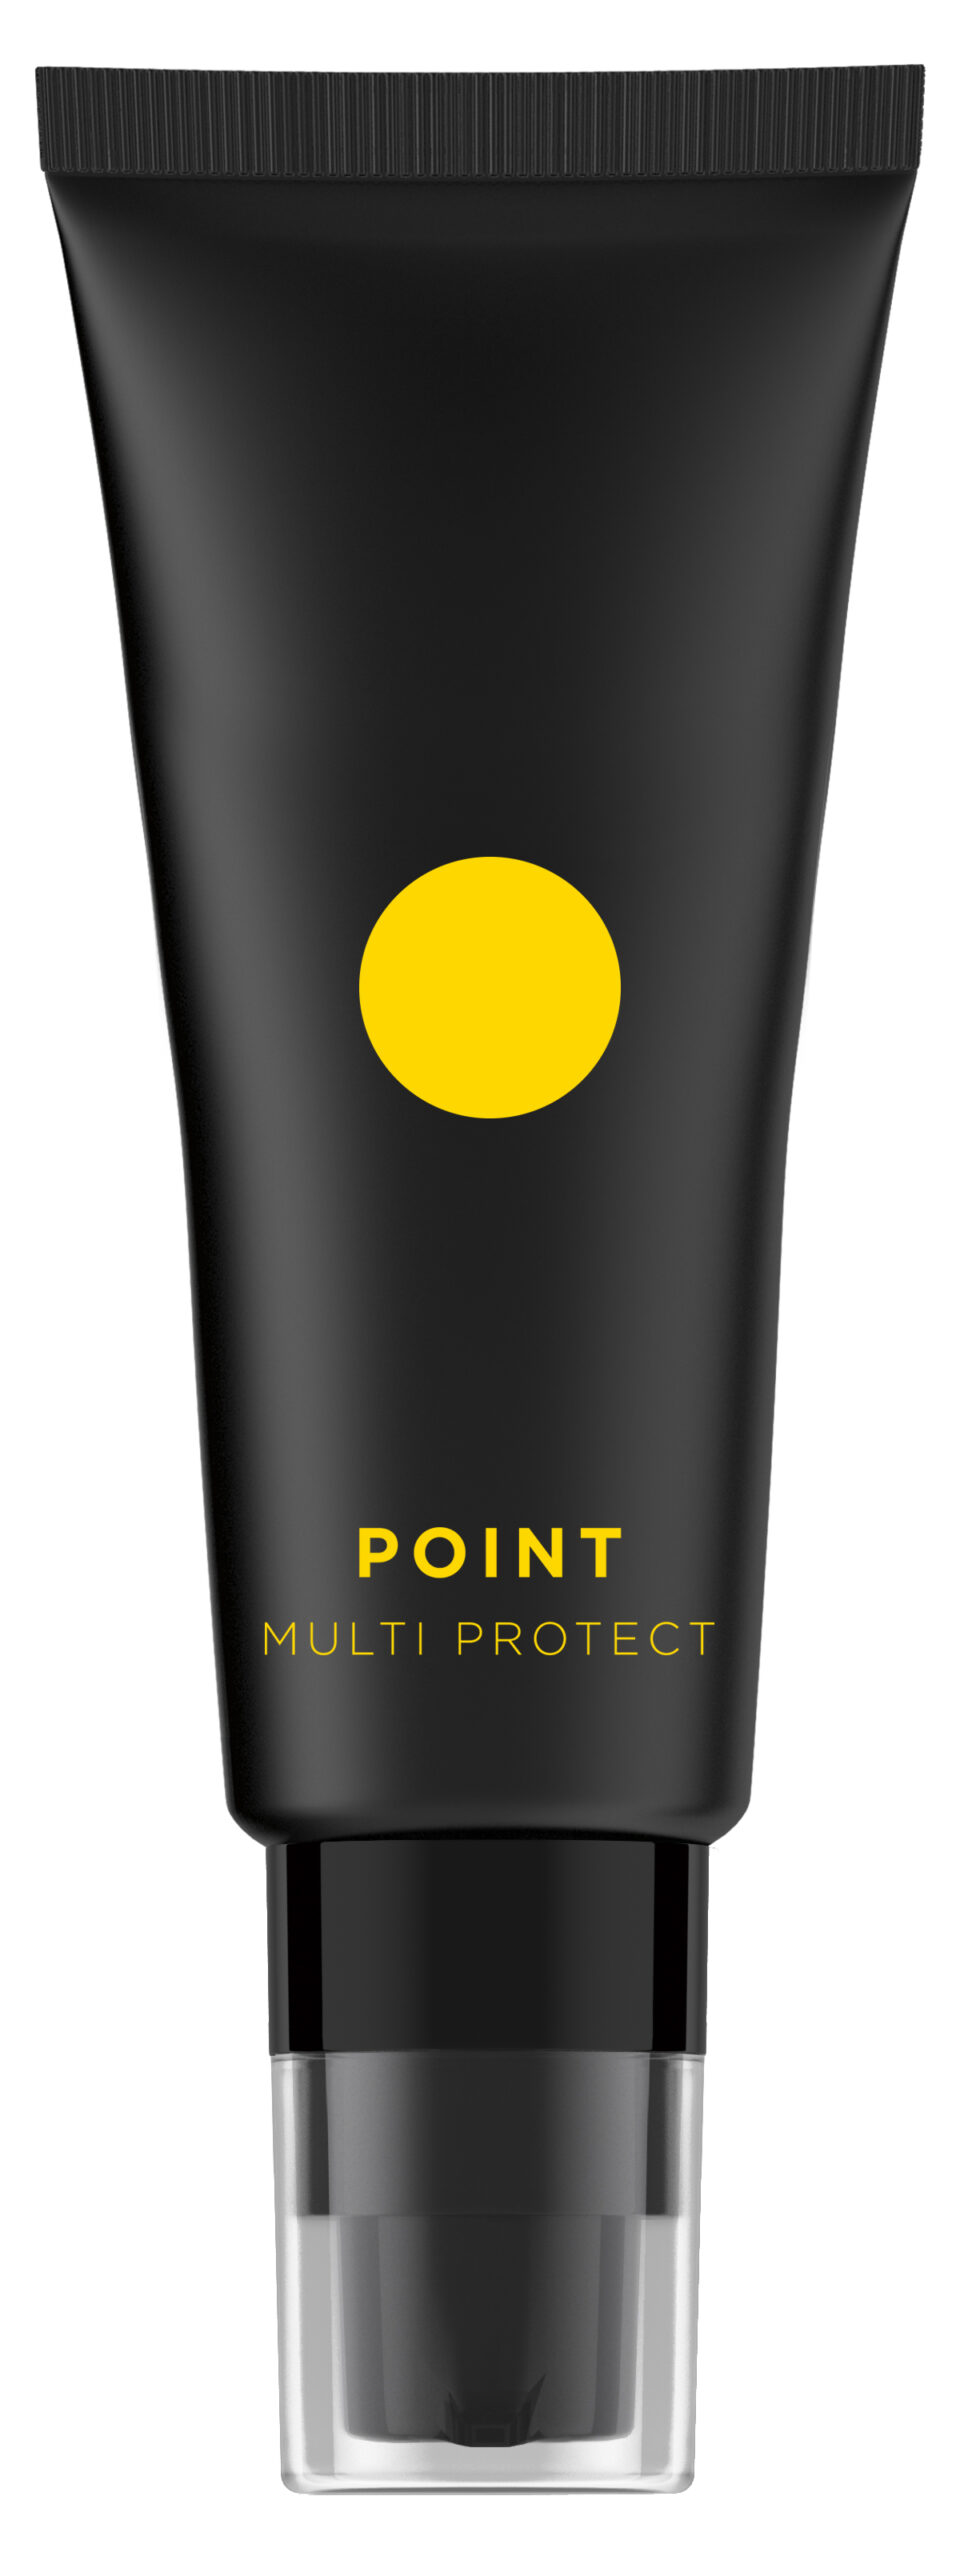 POINT Multi Protect